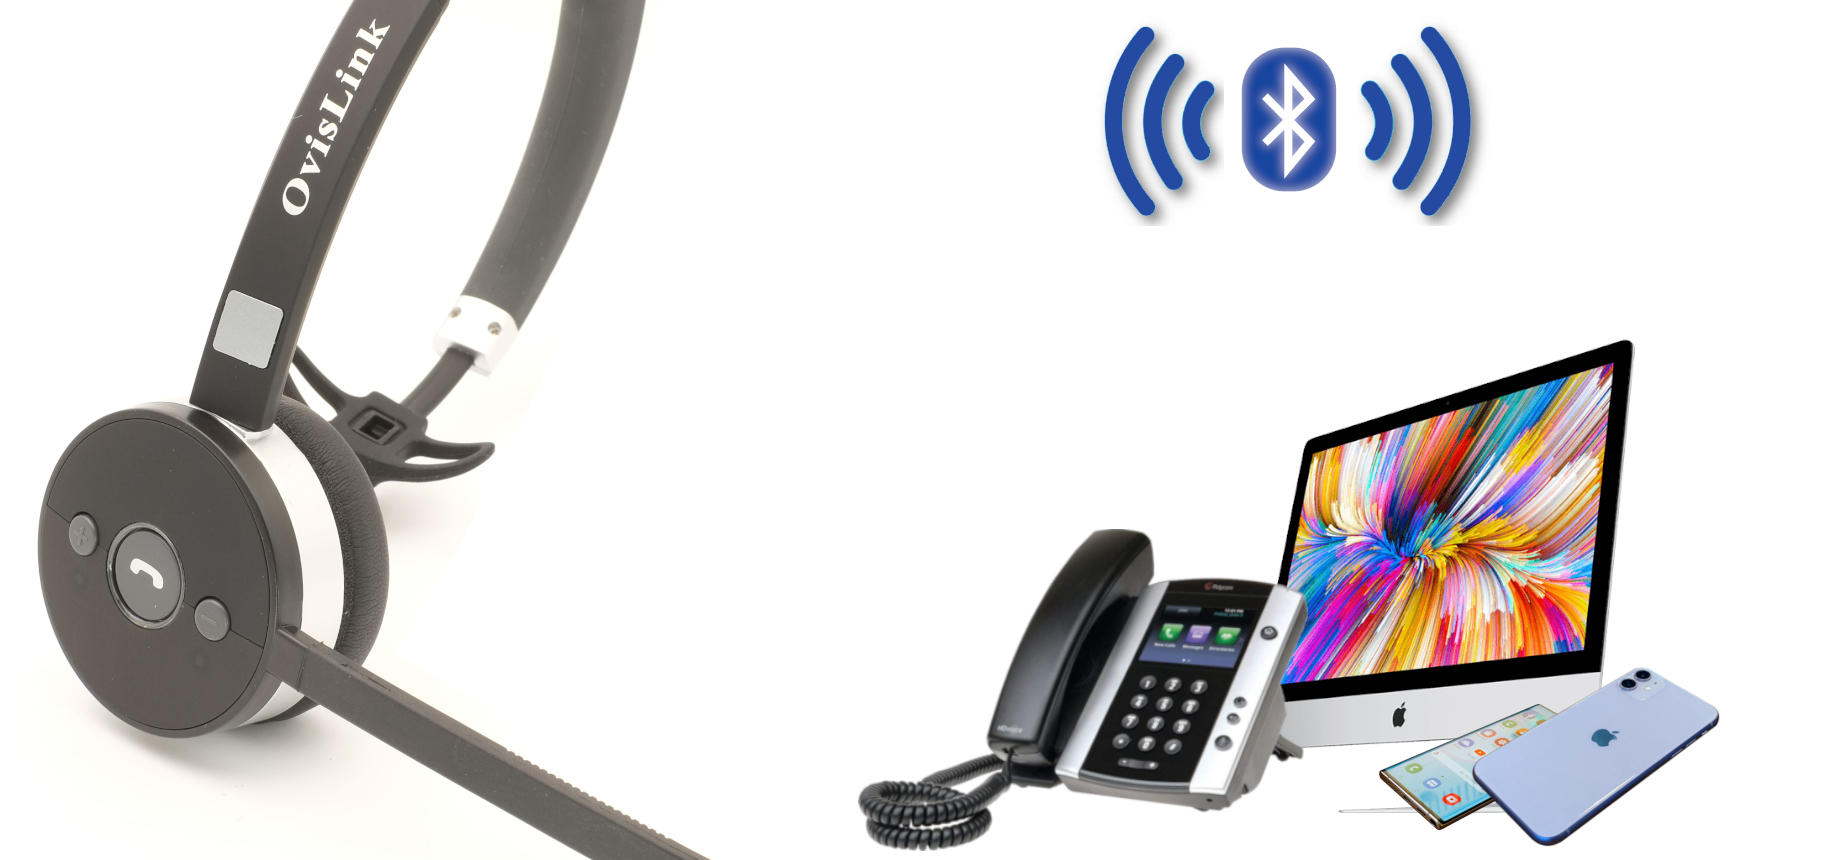 OvisLink wireless headset connects to desktop phone, cell phone and computer through Bluetooth